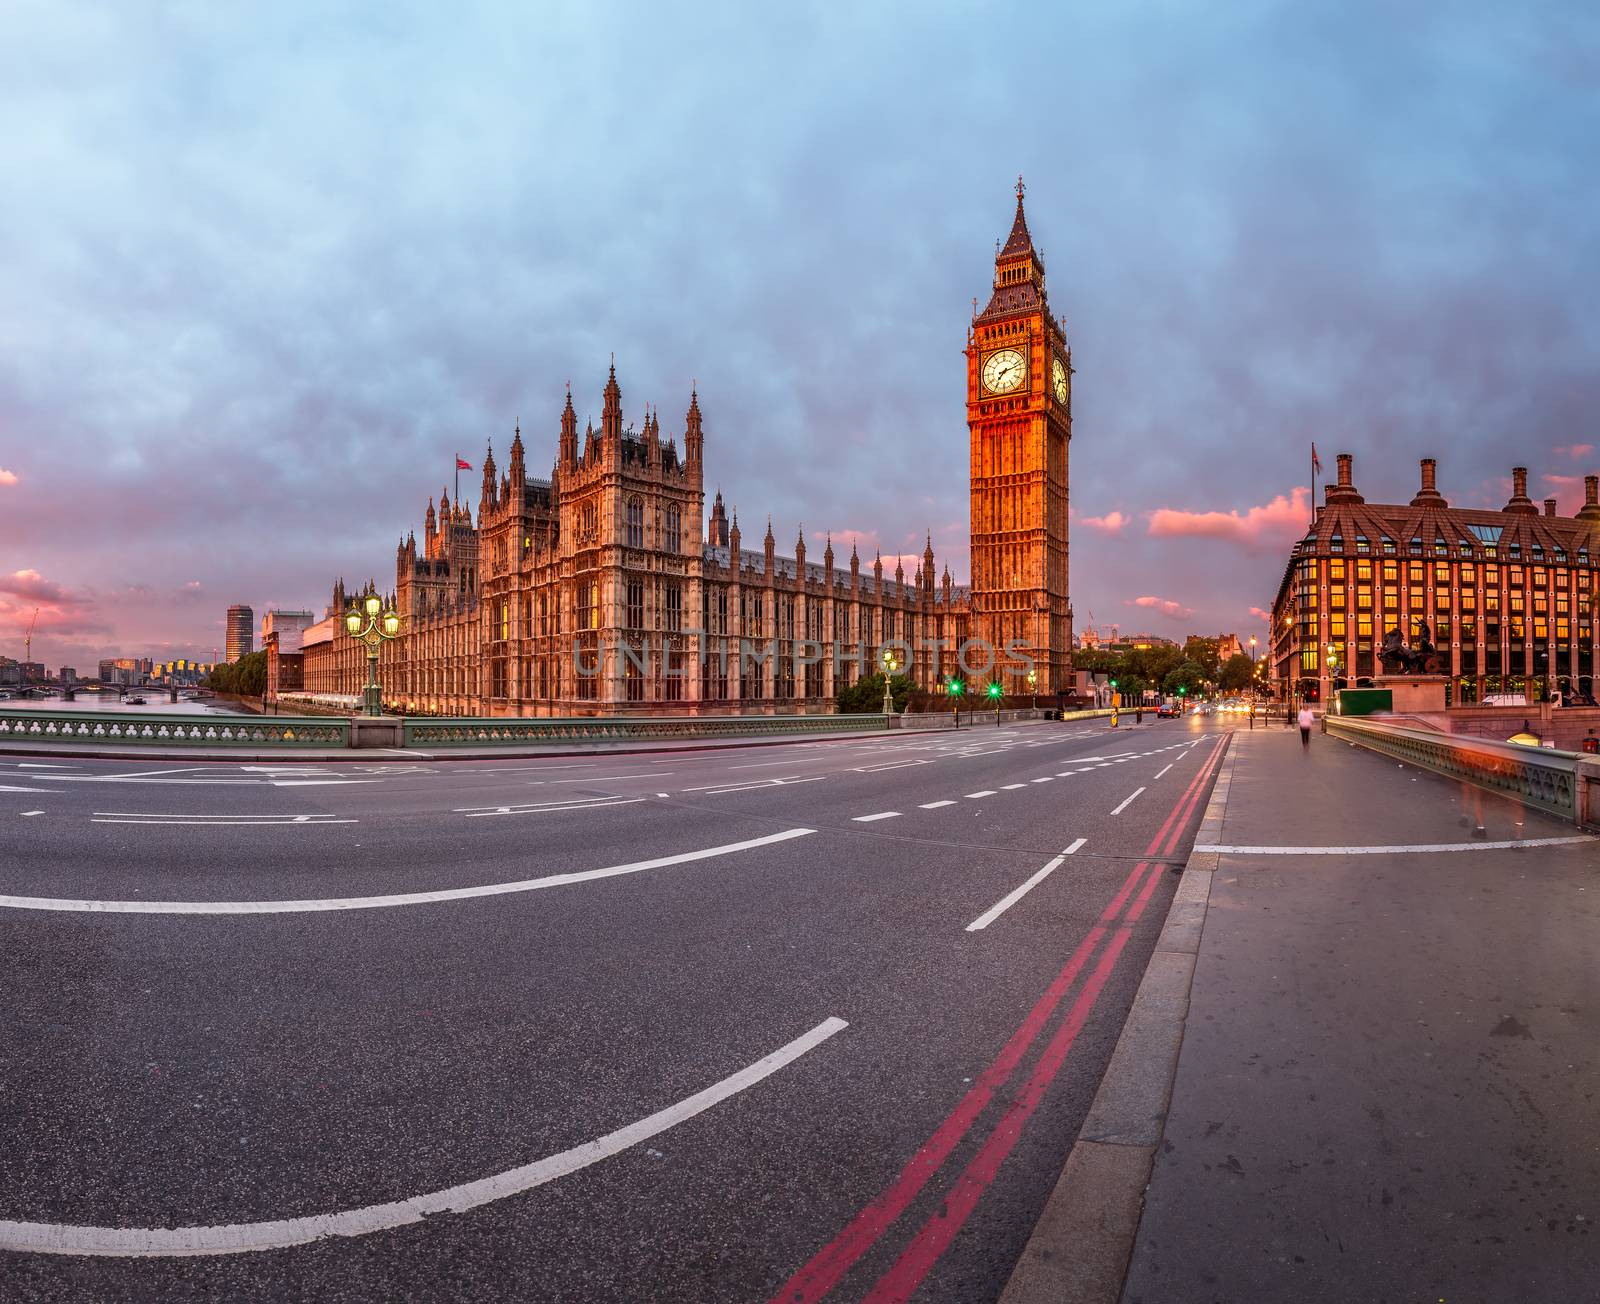 Queen Elizabeth Clock Tower and Westminster Palace in the Mornin by anshar